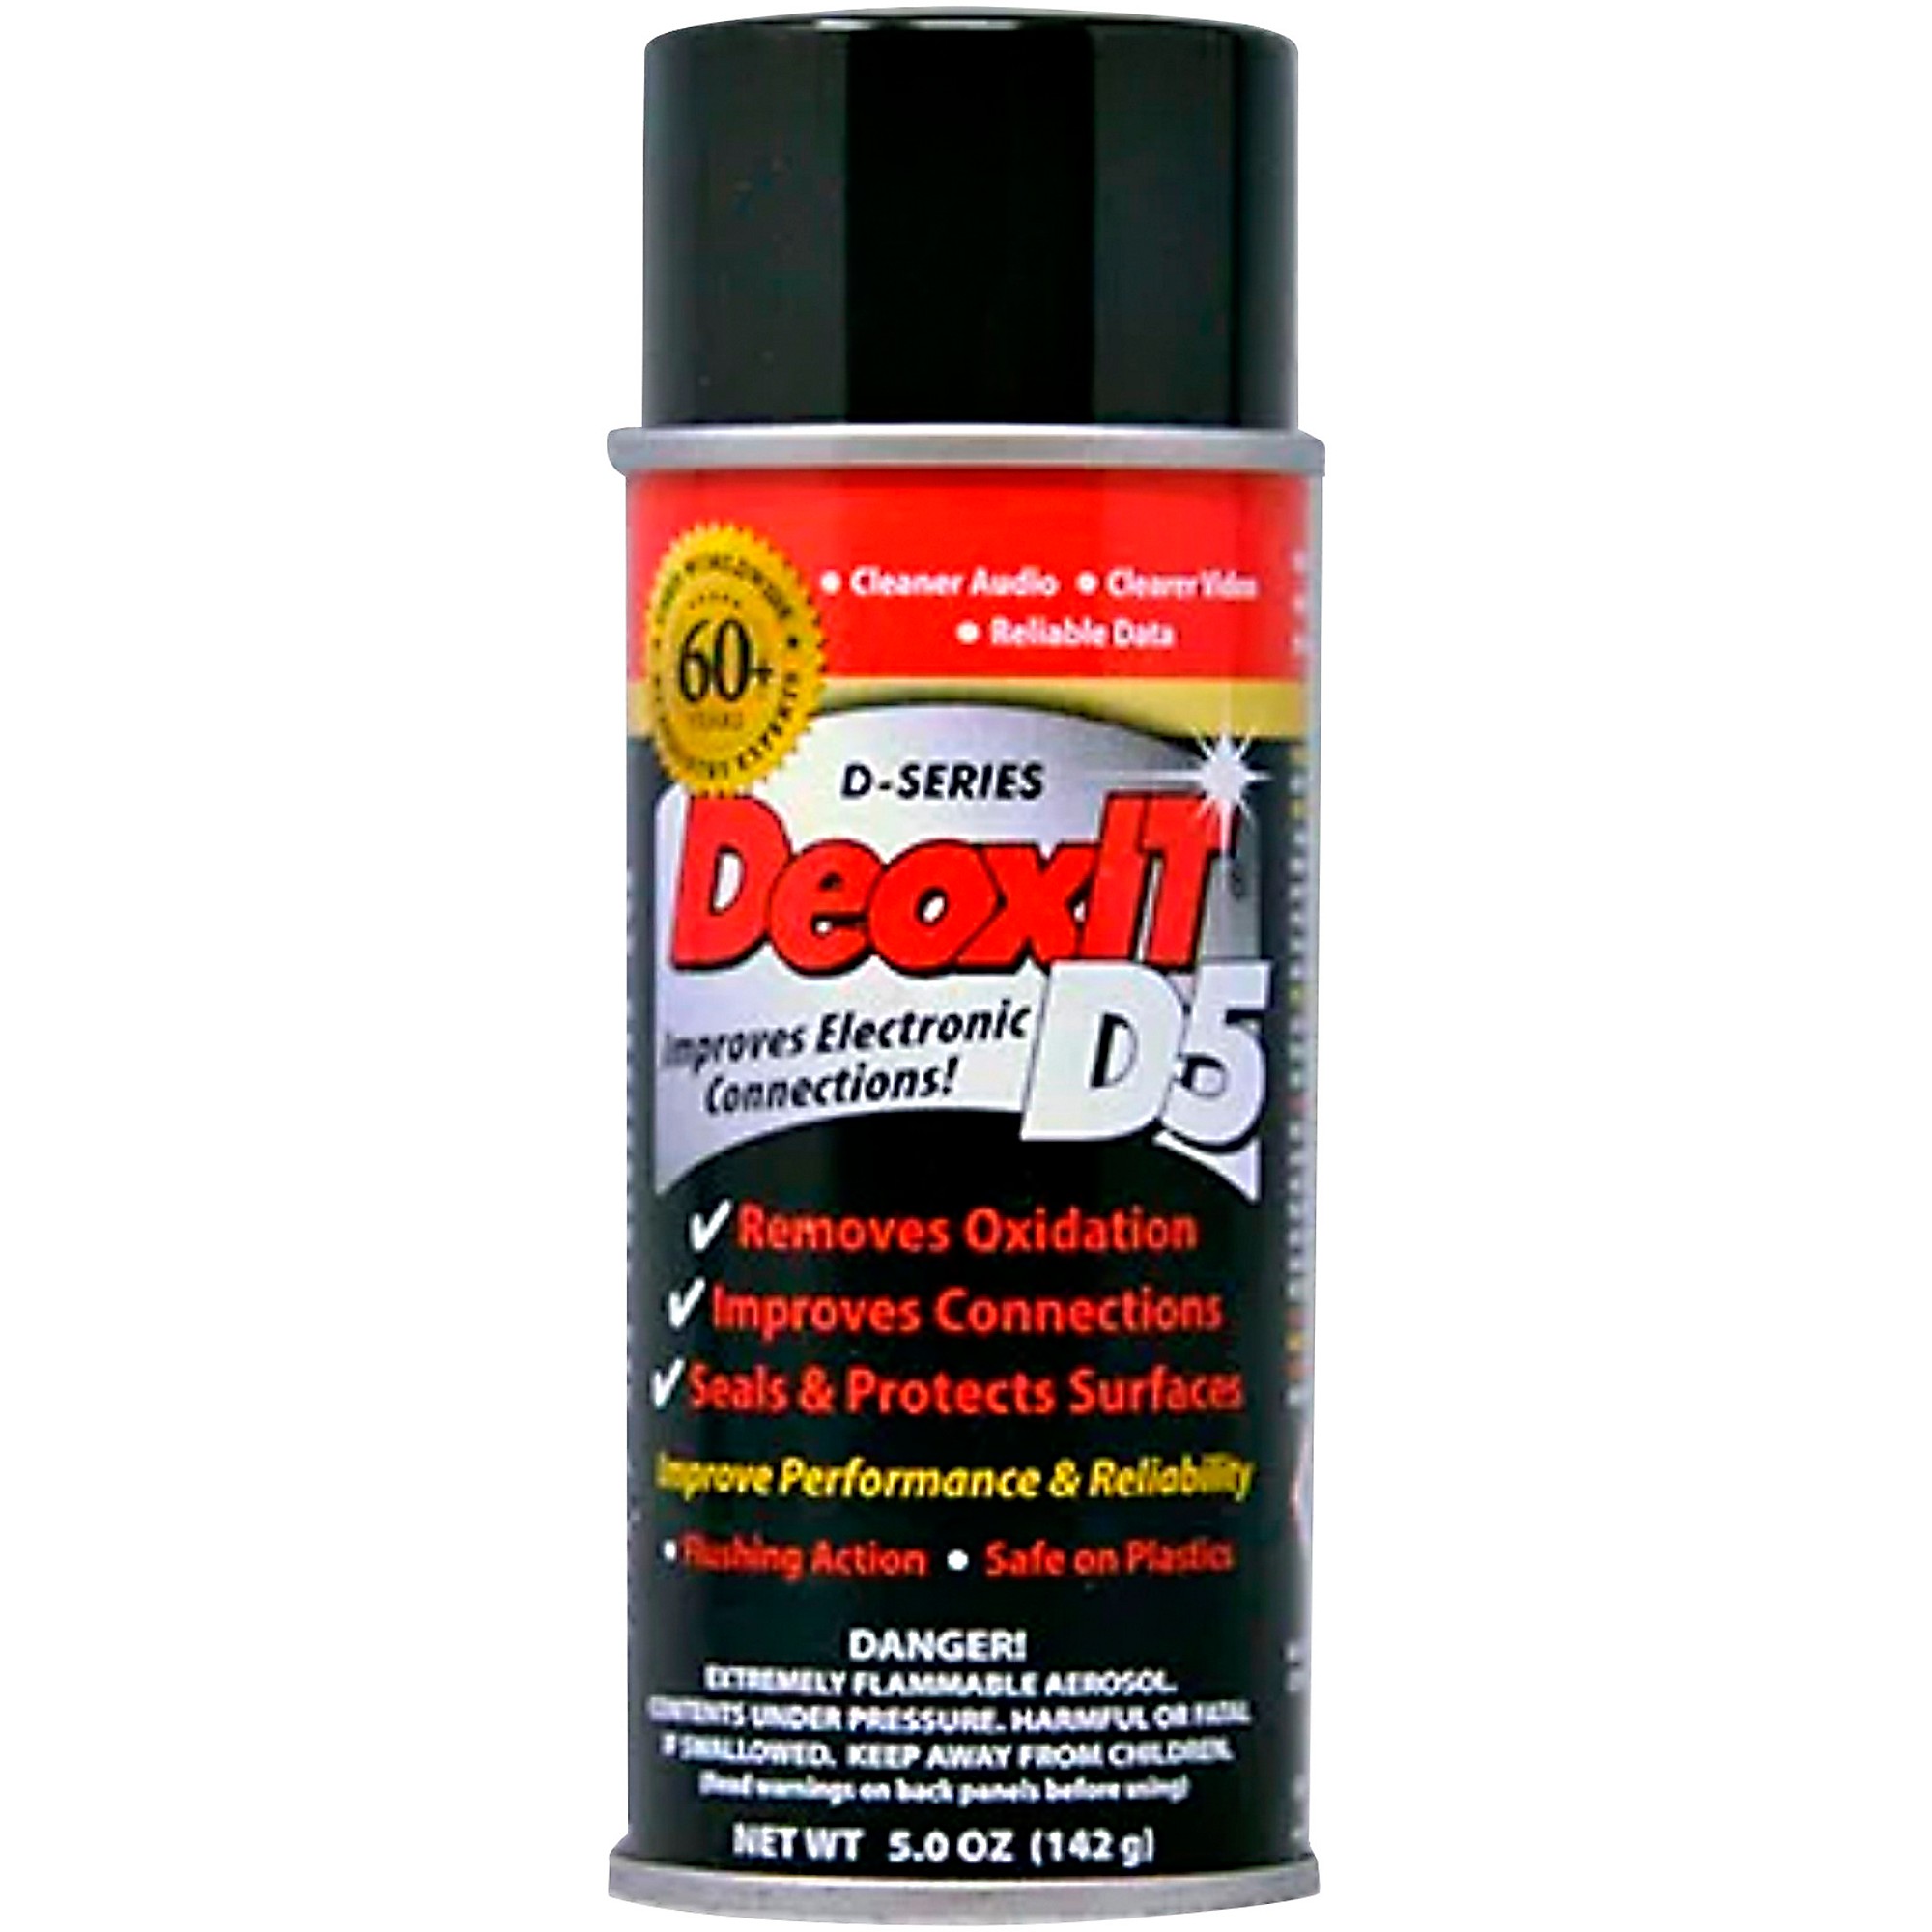 Caig Hosa D5S6 Deoxit Contact Cleaner Spray - 5 oz can